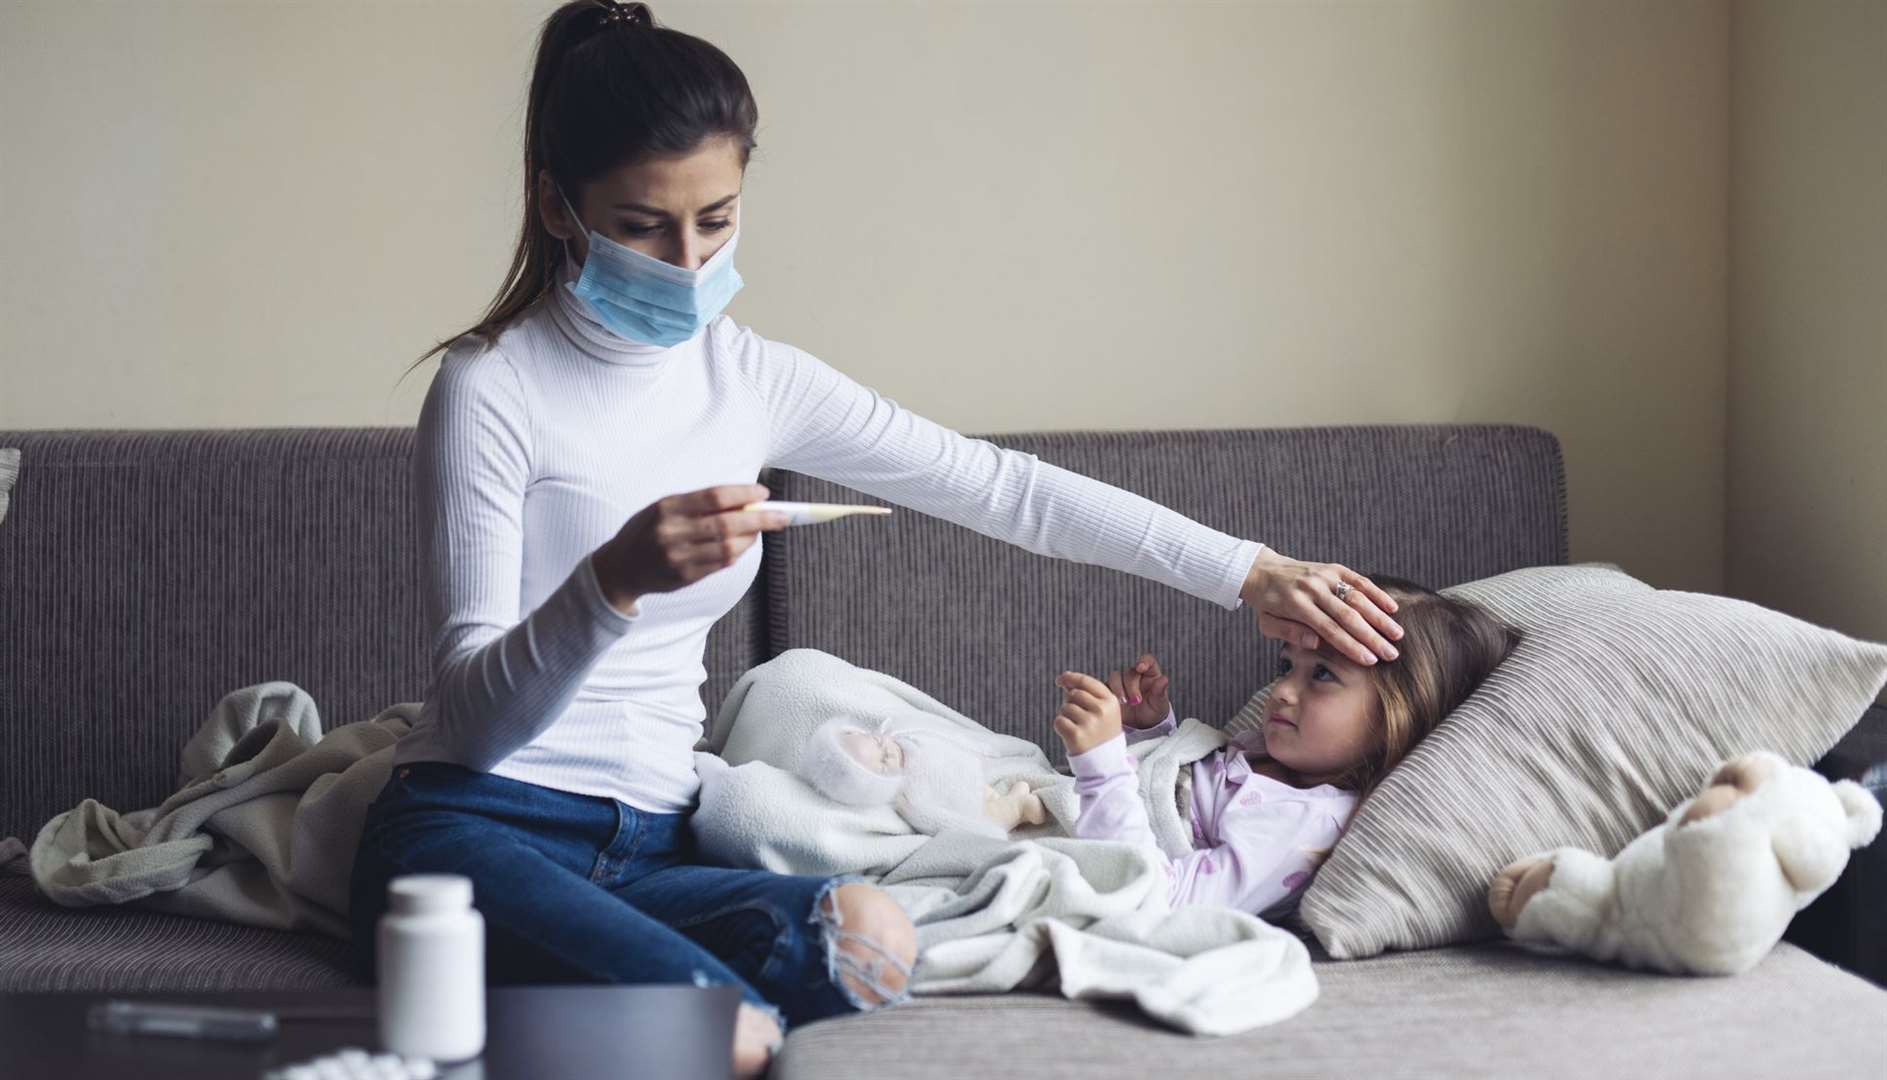 A common cold or coronavirus? With an increase in winter germs it's a question many parents are asking.